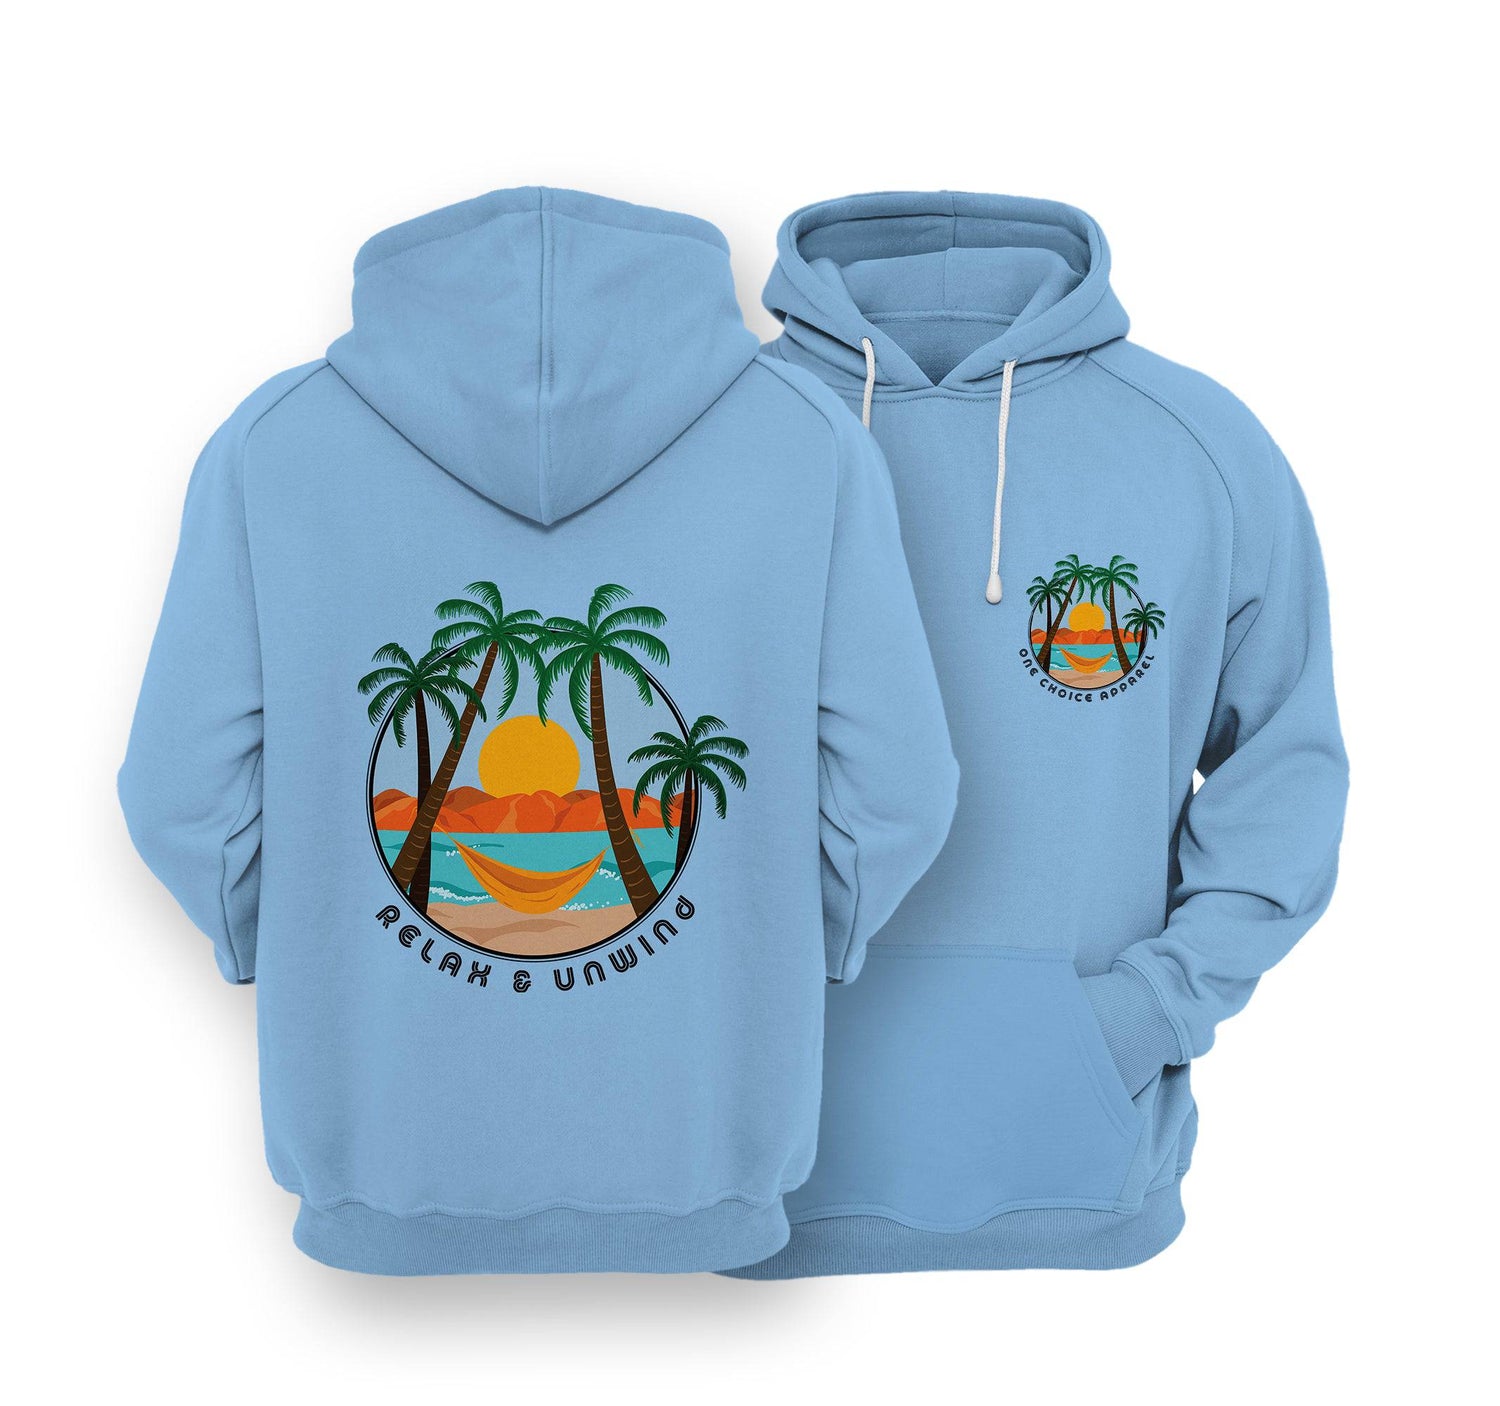 Sustainable Hoodie - Relax & Unwind - One Choice Apparel